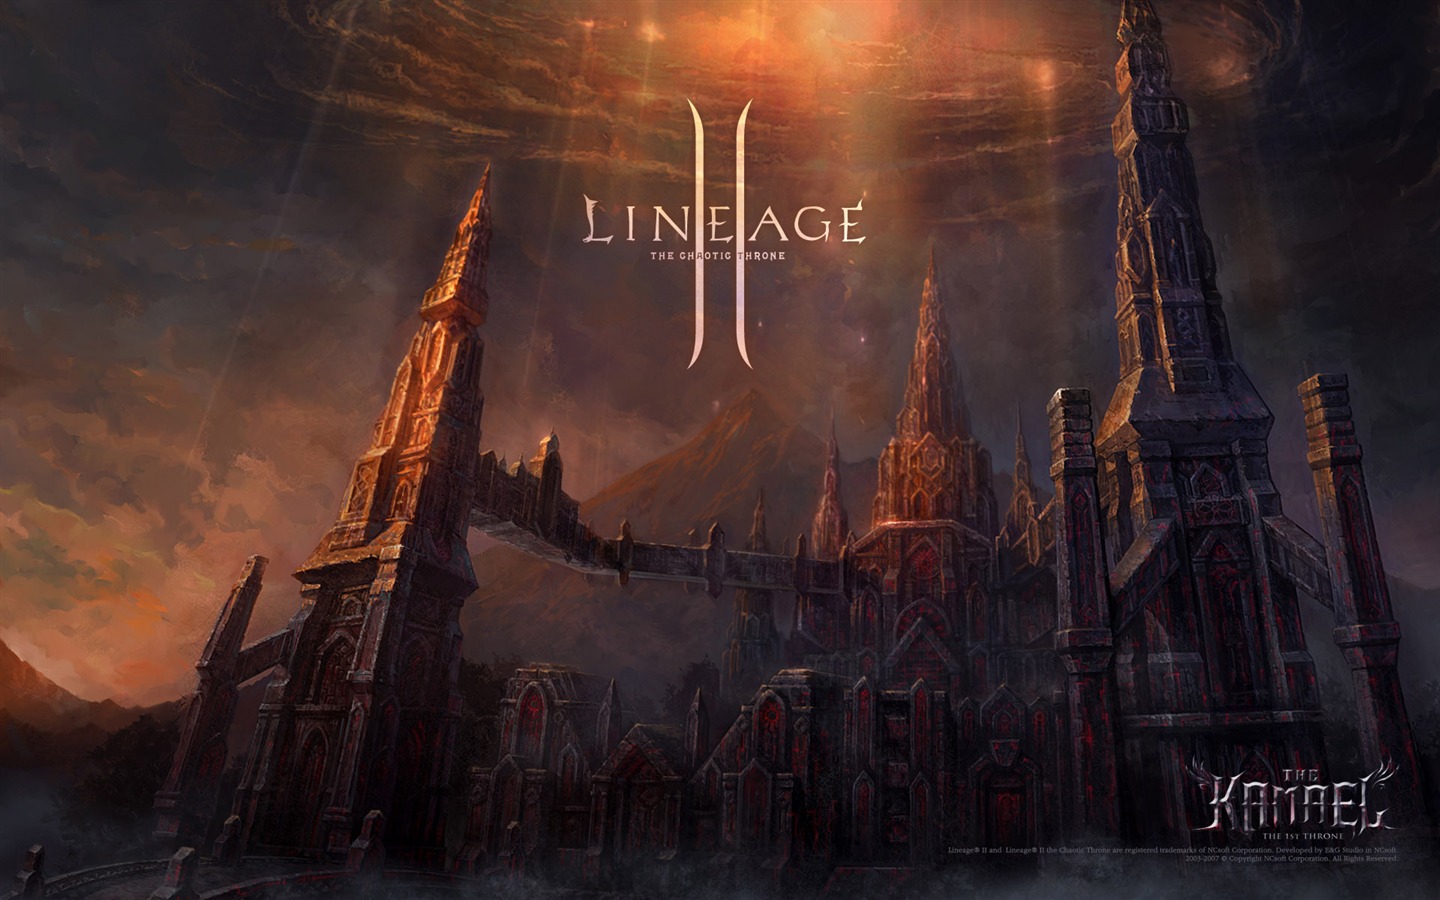 LINEAGE Ⅱ modeling HD gaming wallpapers #4 - 1440x900